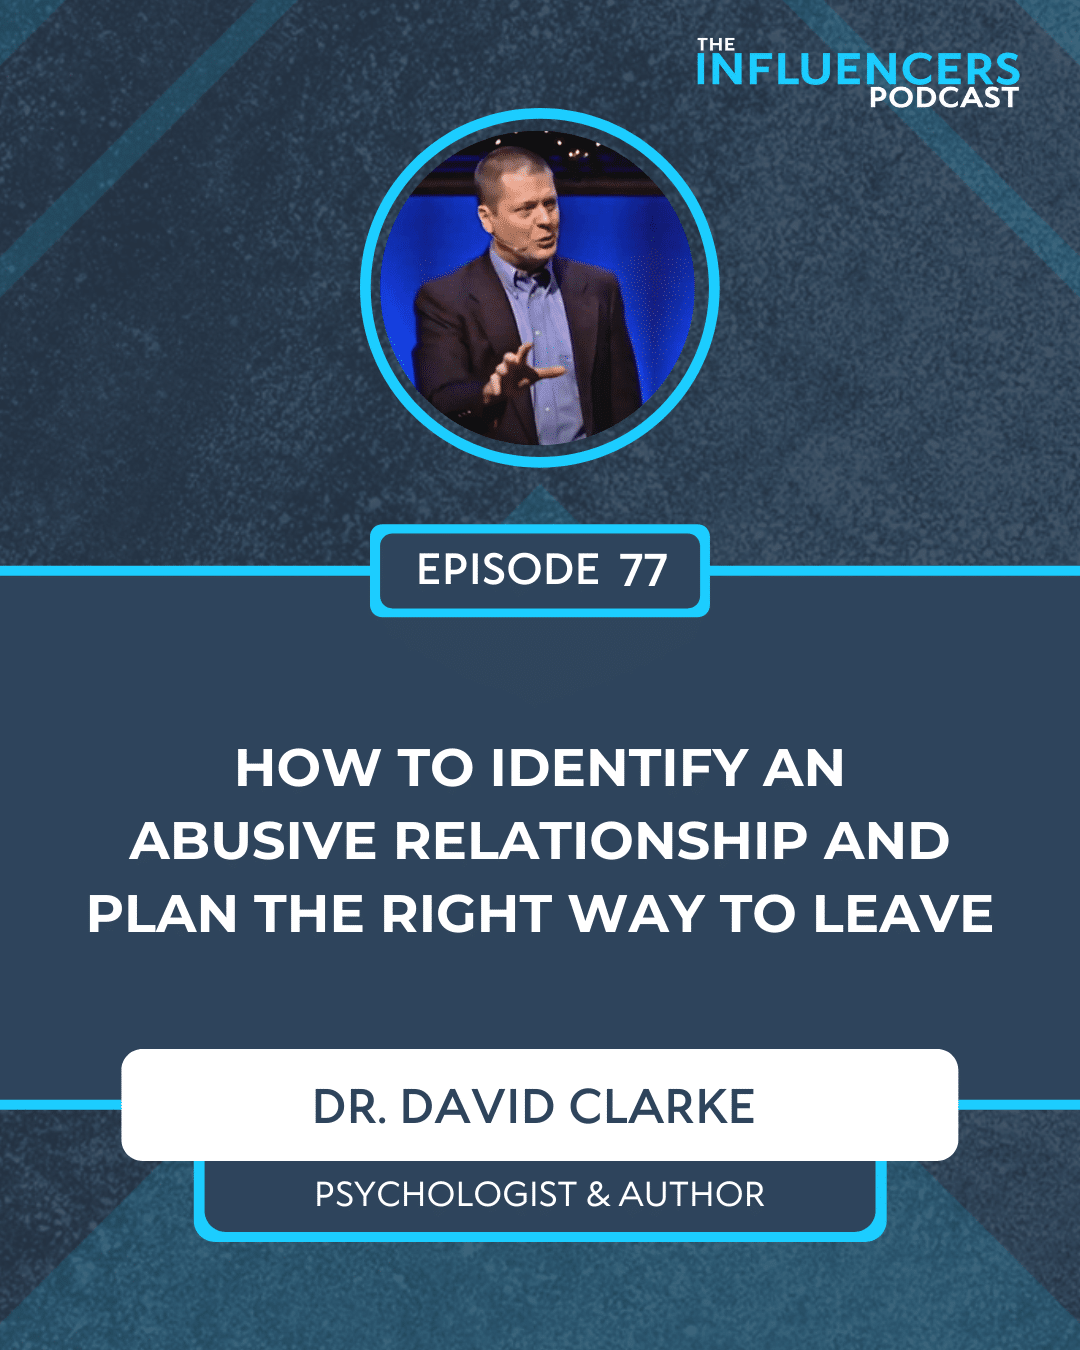 Episode 77 with Dr. David Clarke.